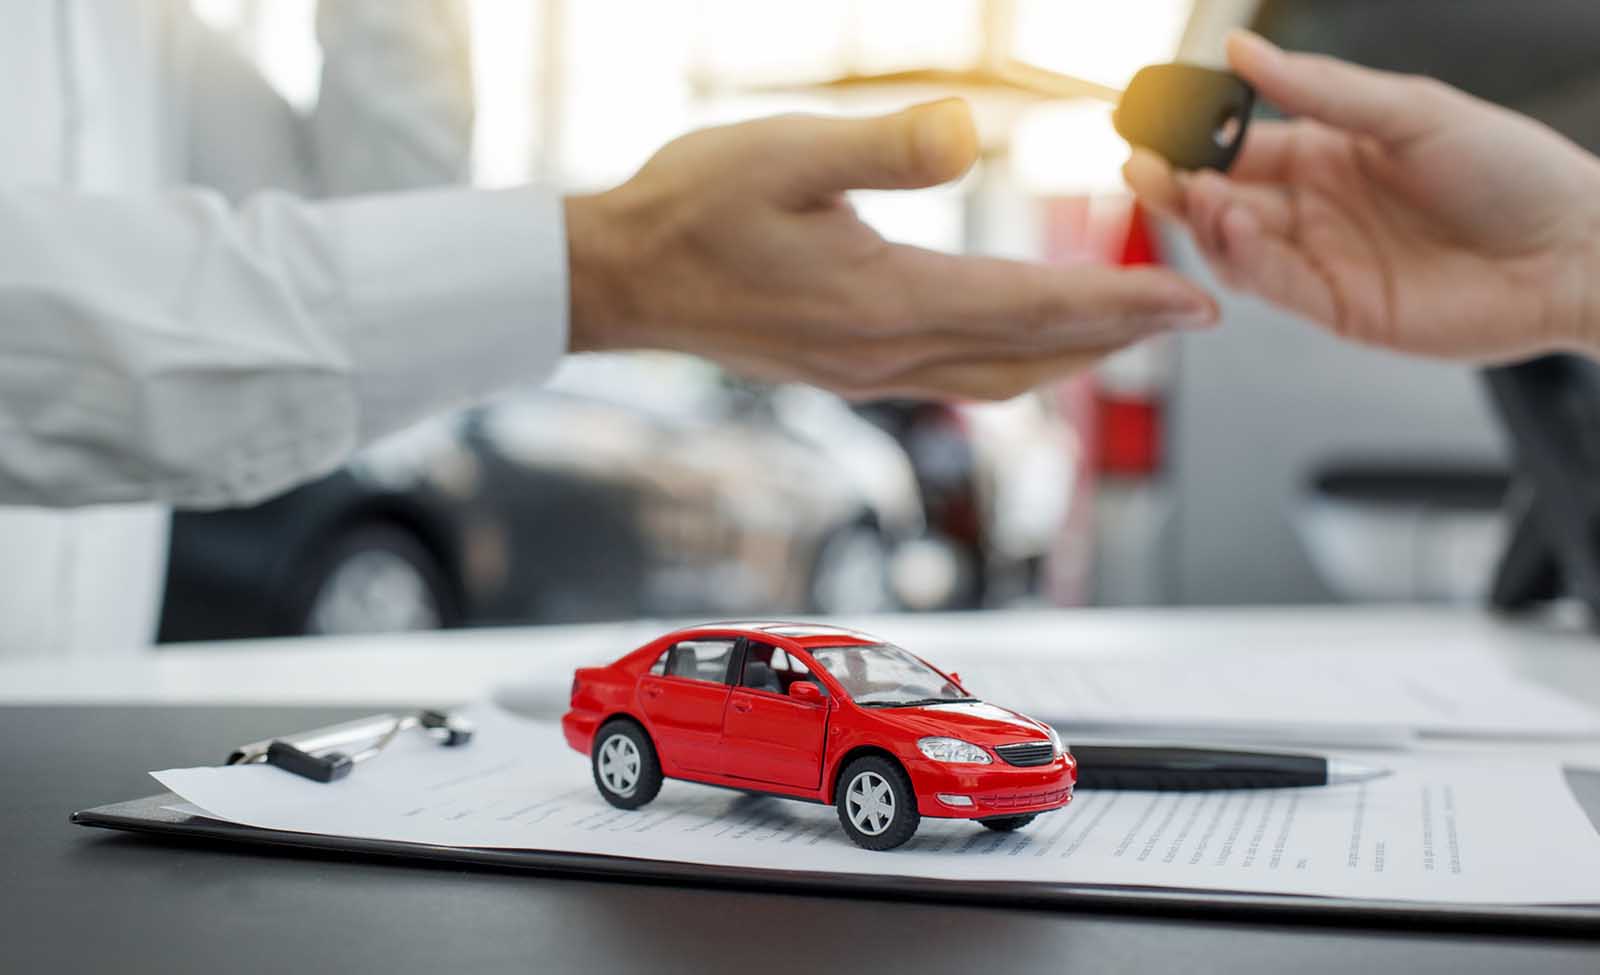 Toy car on legal documents with two hands passing car keys behind